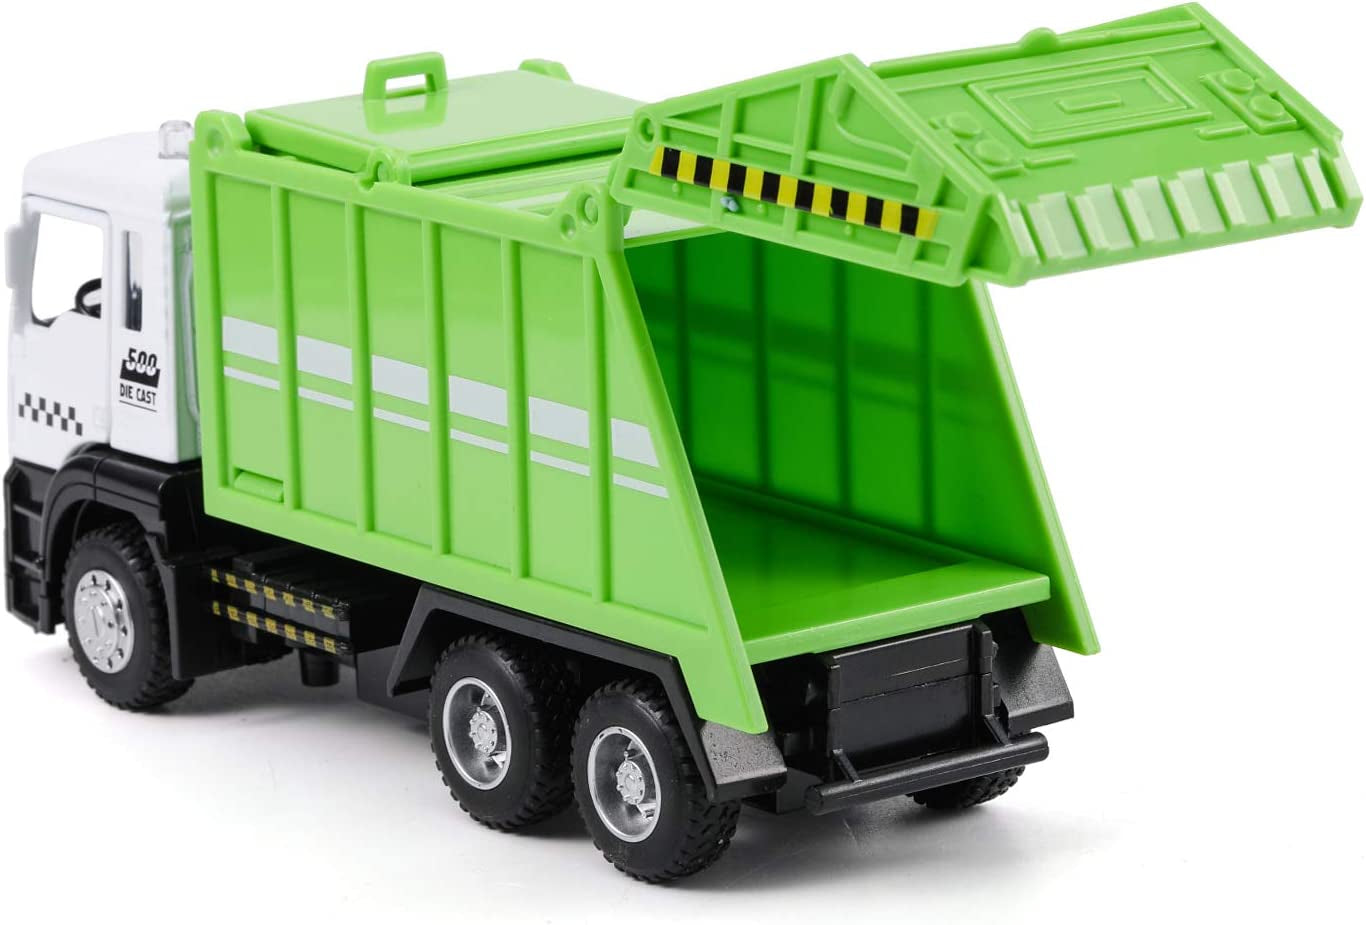 Garbage Truck Toys Alloy Diecast Cars Trash Truck Wiht Light and Sound Recycled Trucks Toy for Boys Age 3,4,5,6,7 (1PC) (Garbage Truck)